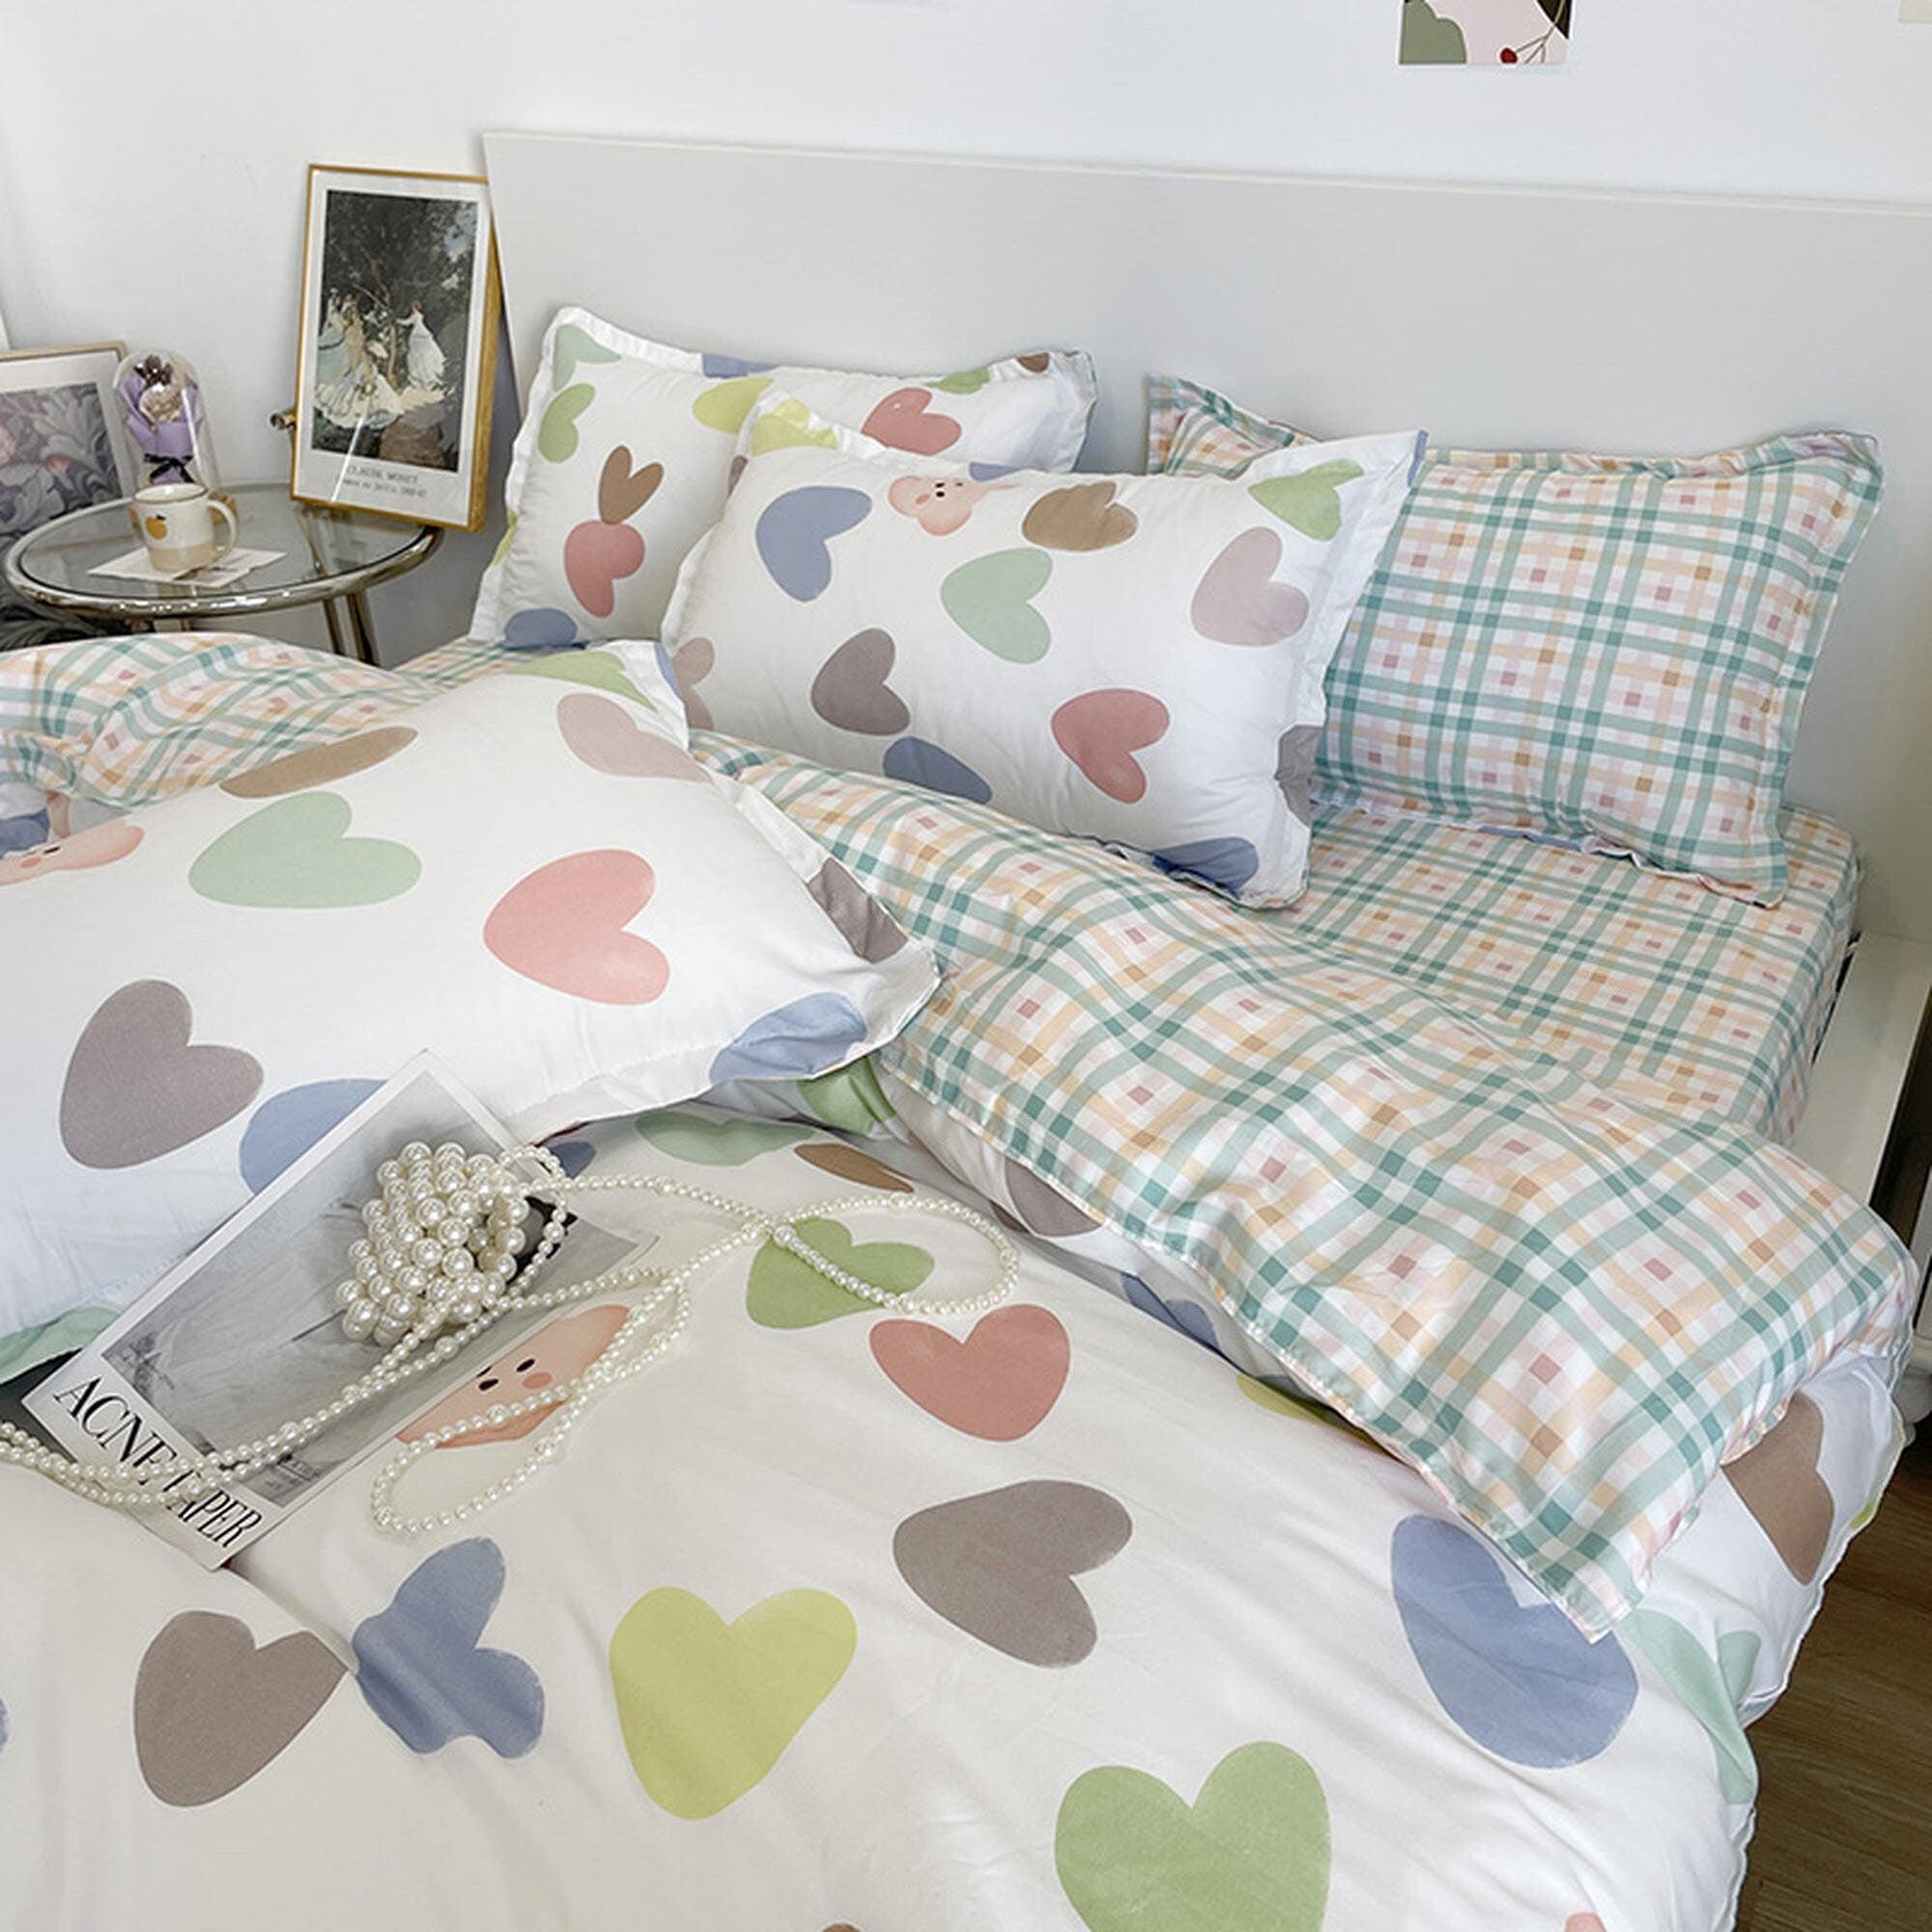 daintyduvet Colorful Bedding Set in Pastel Colors, Hearts Checkered Bedding, Kawaii Dorm Bedding, Aesthetic Bedding, Kids Duvet Cover King Queen Full